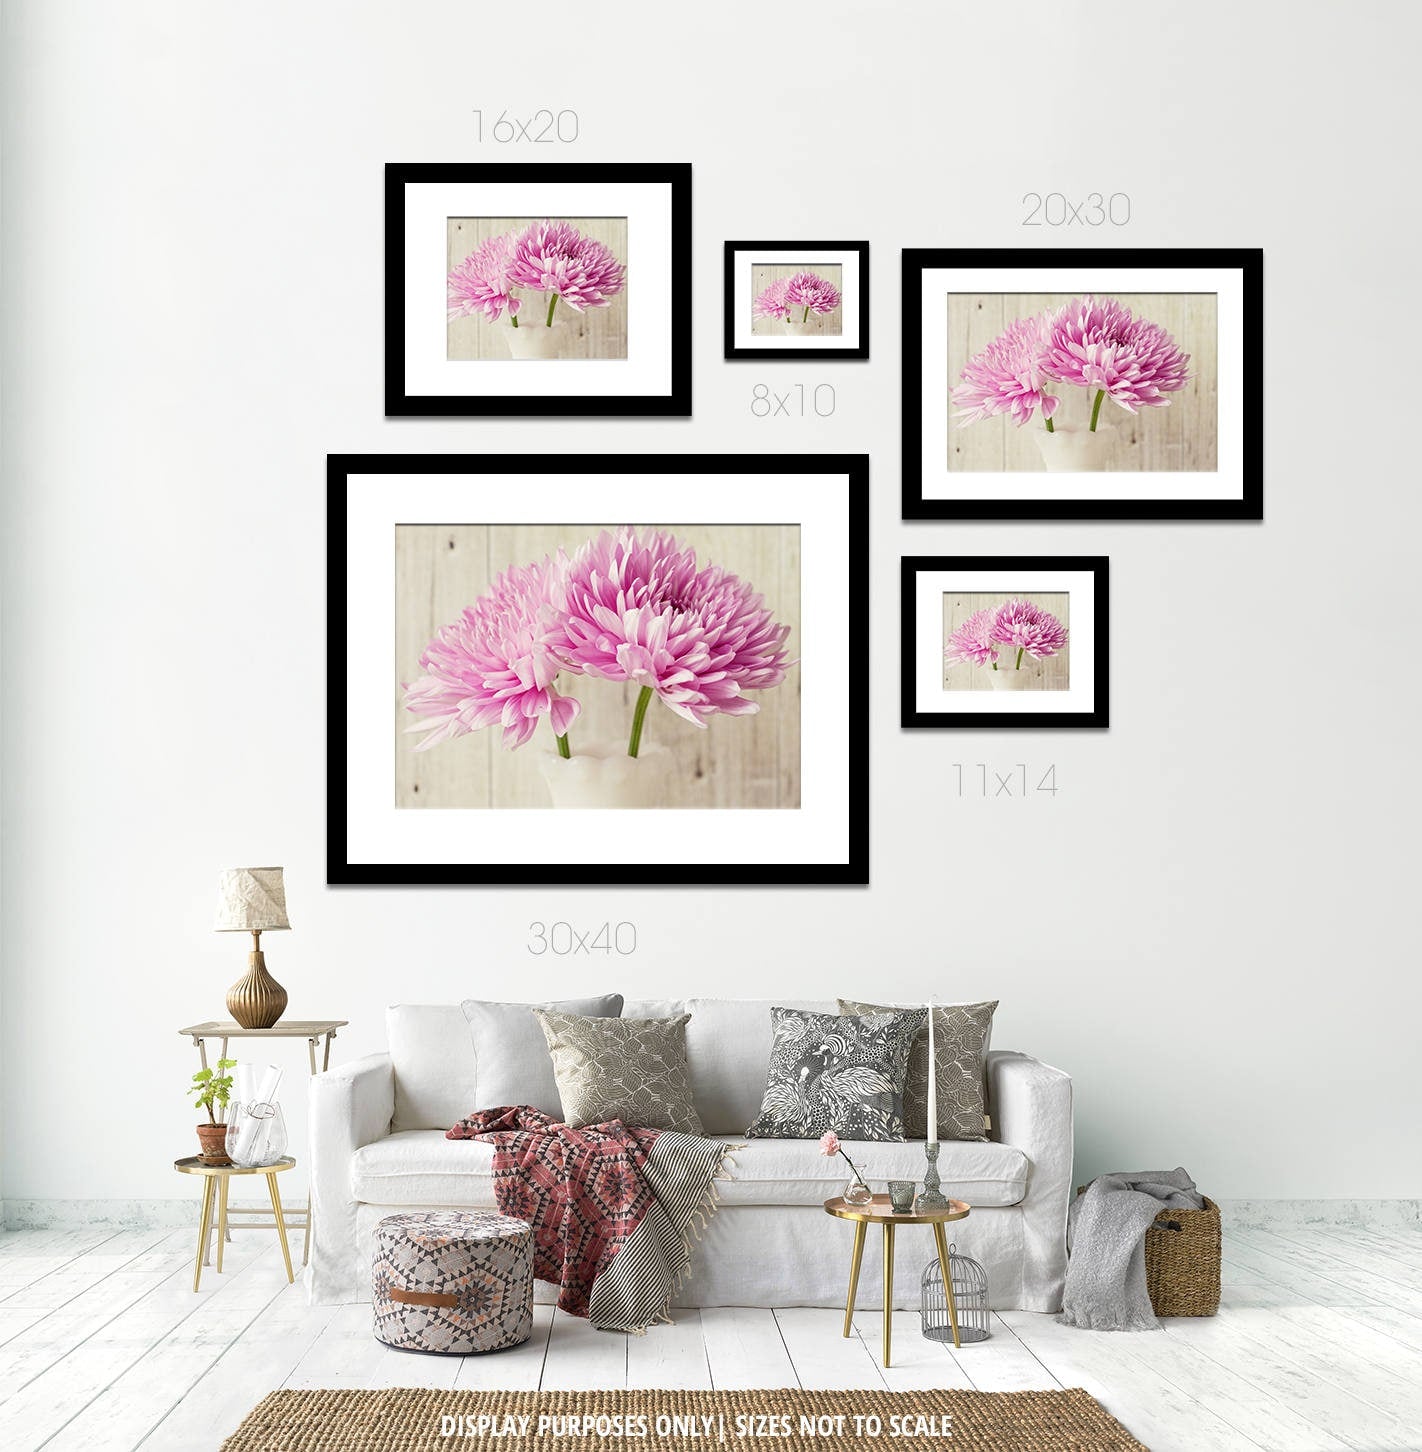 Pink Oleander Flower Photography Print, Botanical Gallery Canvas or Unframed Photo, Nature Wall Art - eireanneilis